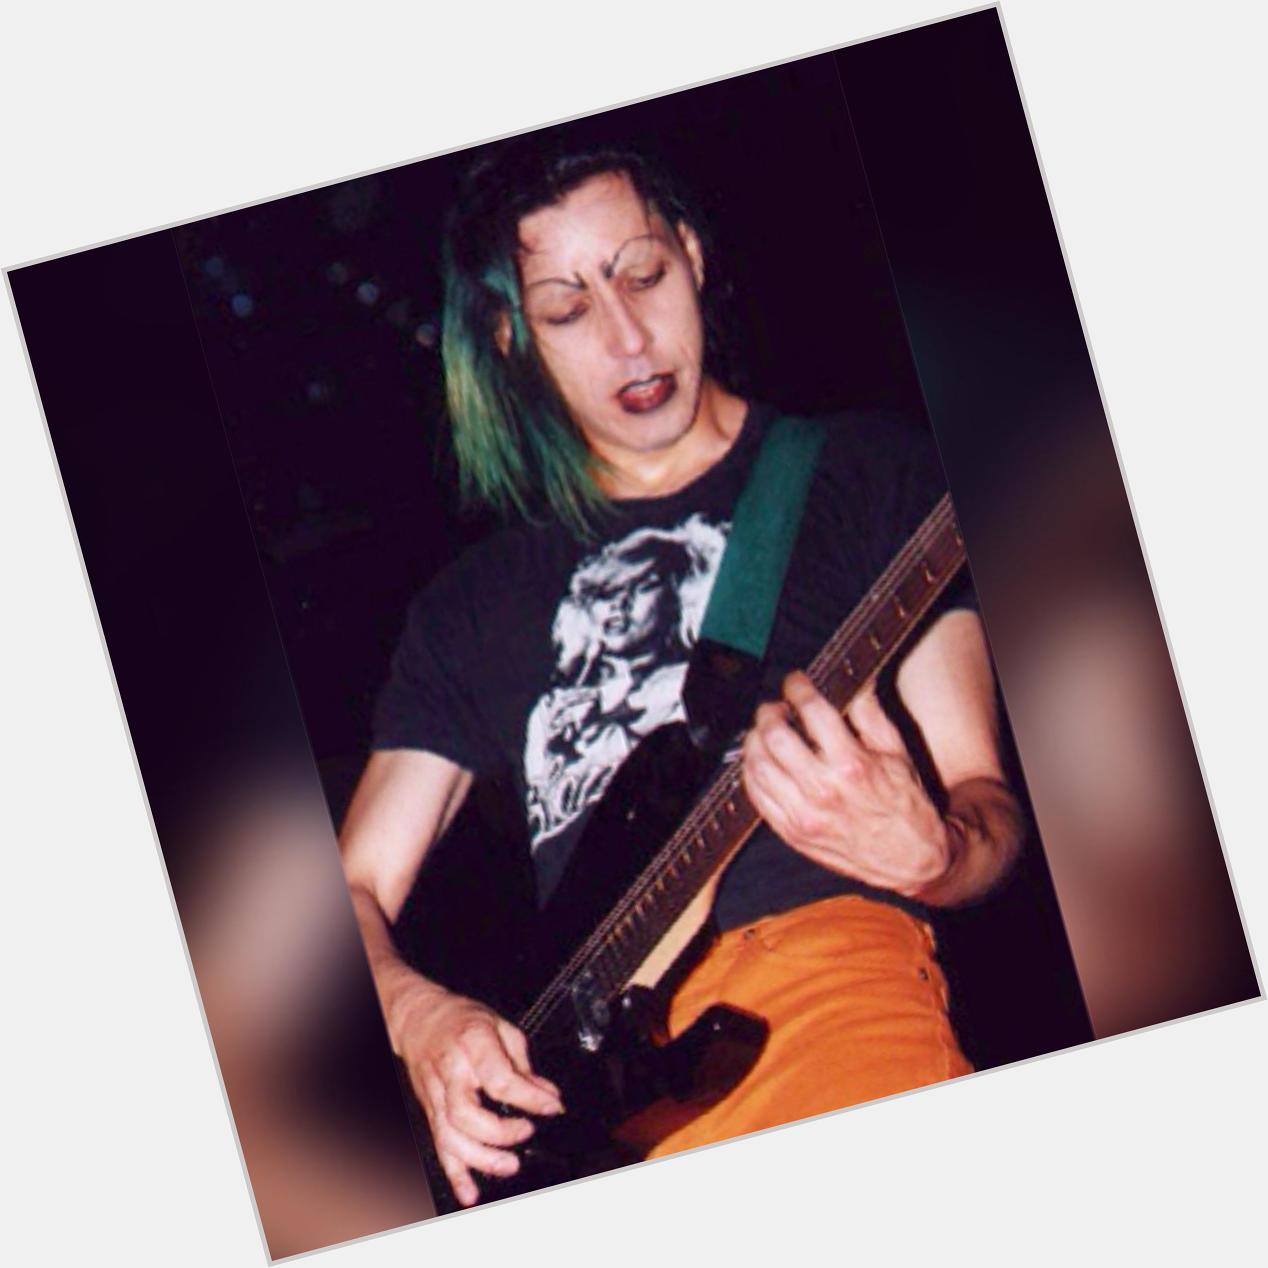 As well as a happy birthday to the original Marilyn Manson guitarist Daisy Berkowitz! 